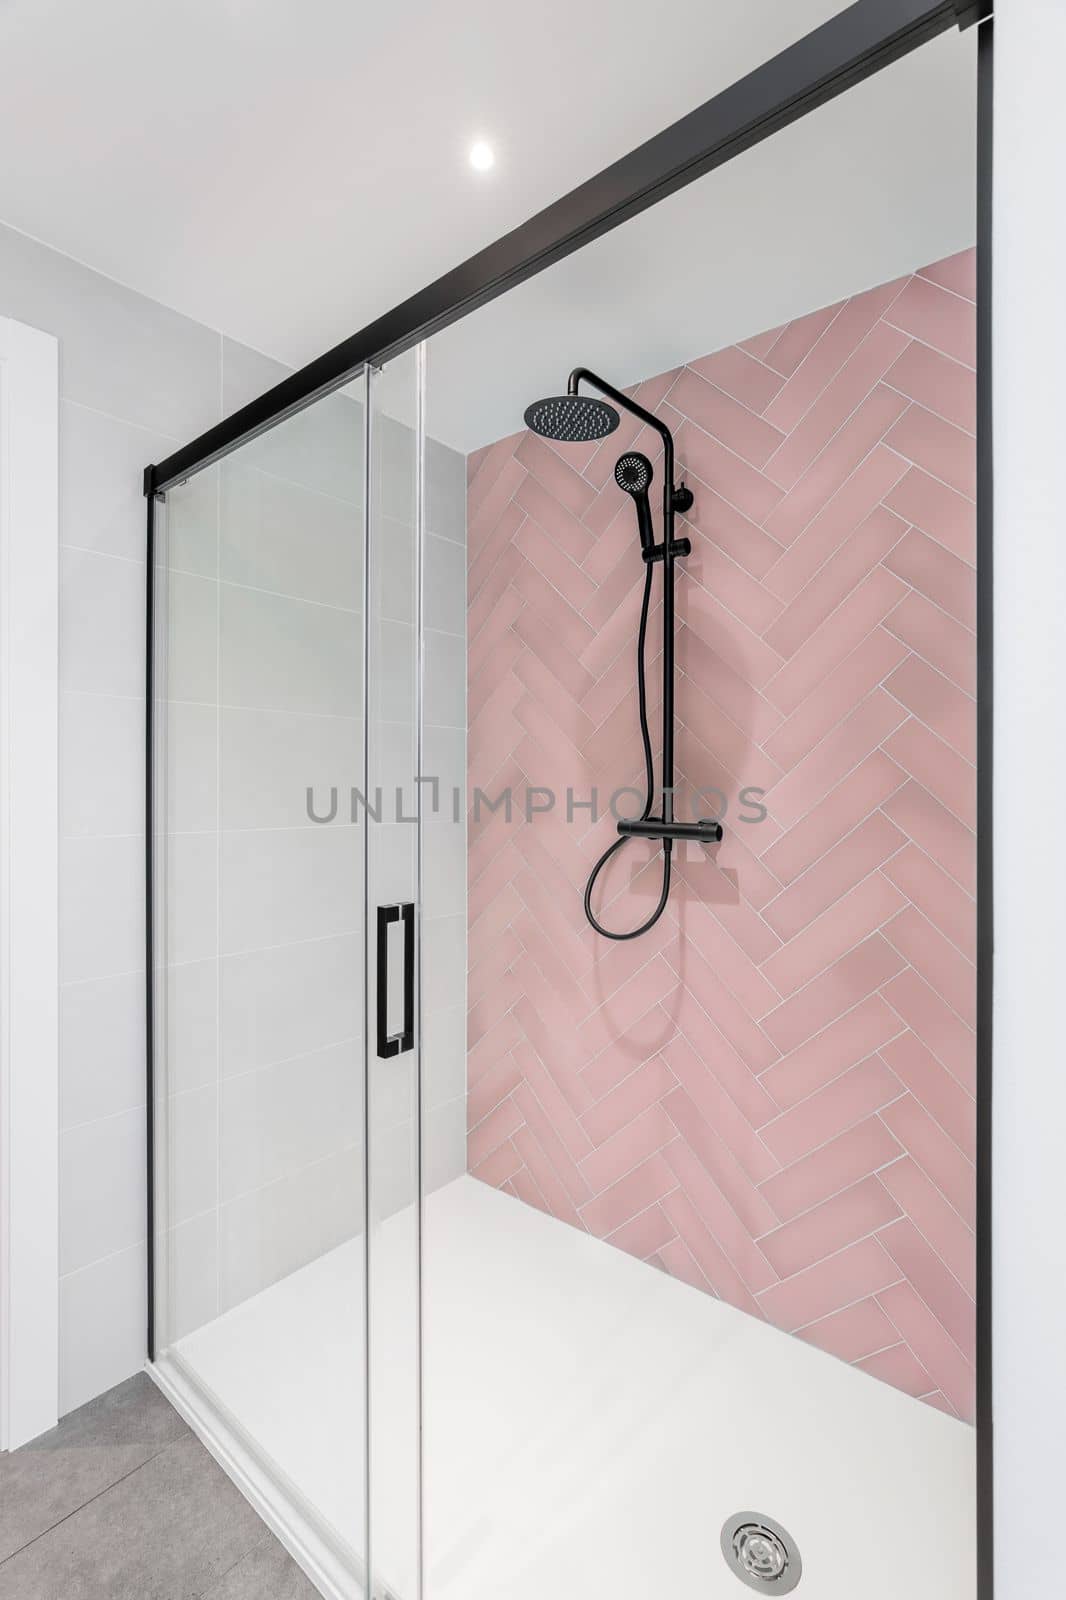 Modern bathroom with lpink and white tiles, rain head, hand held shower and glass door